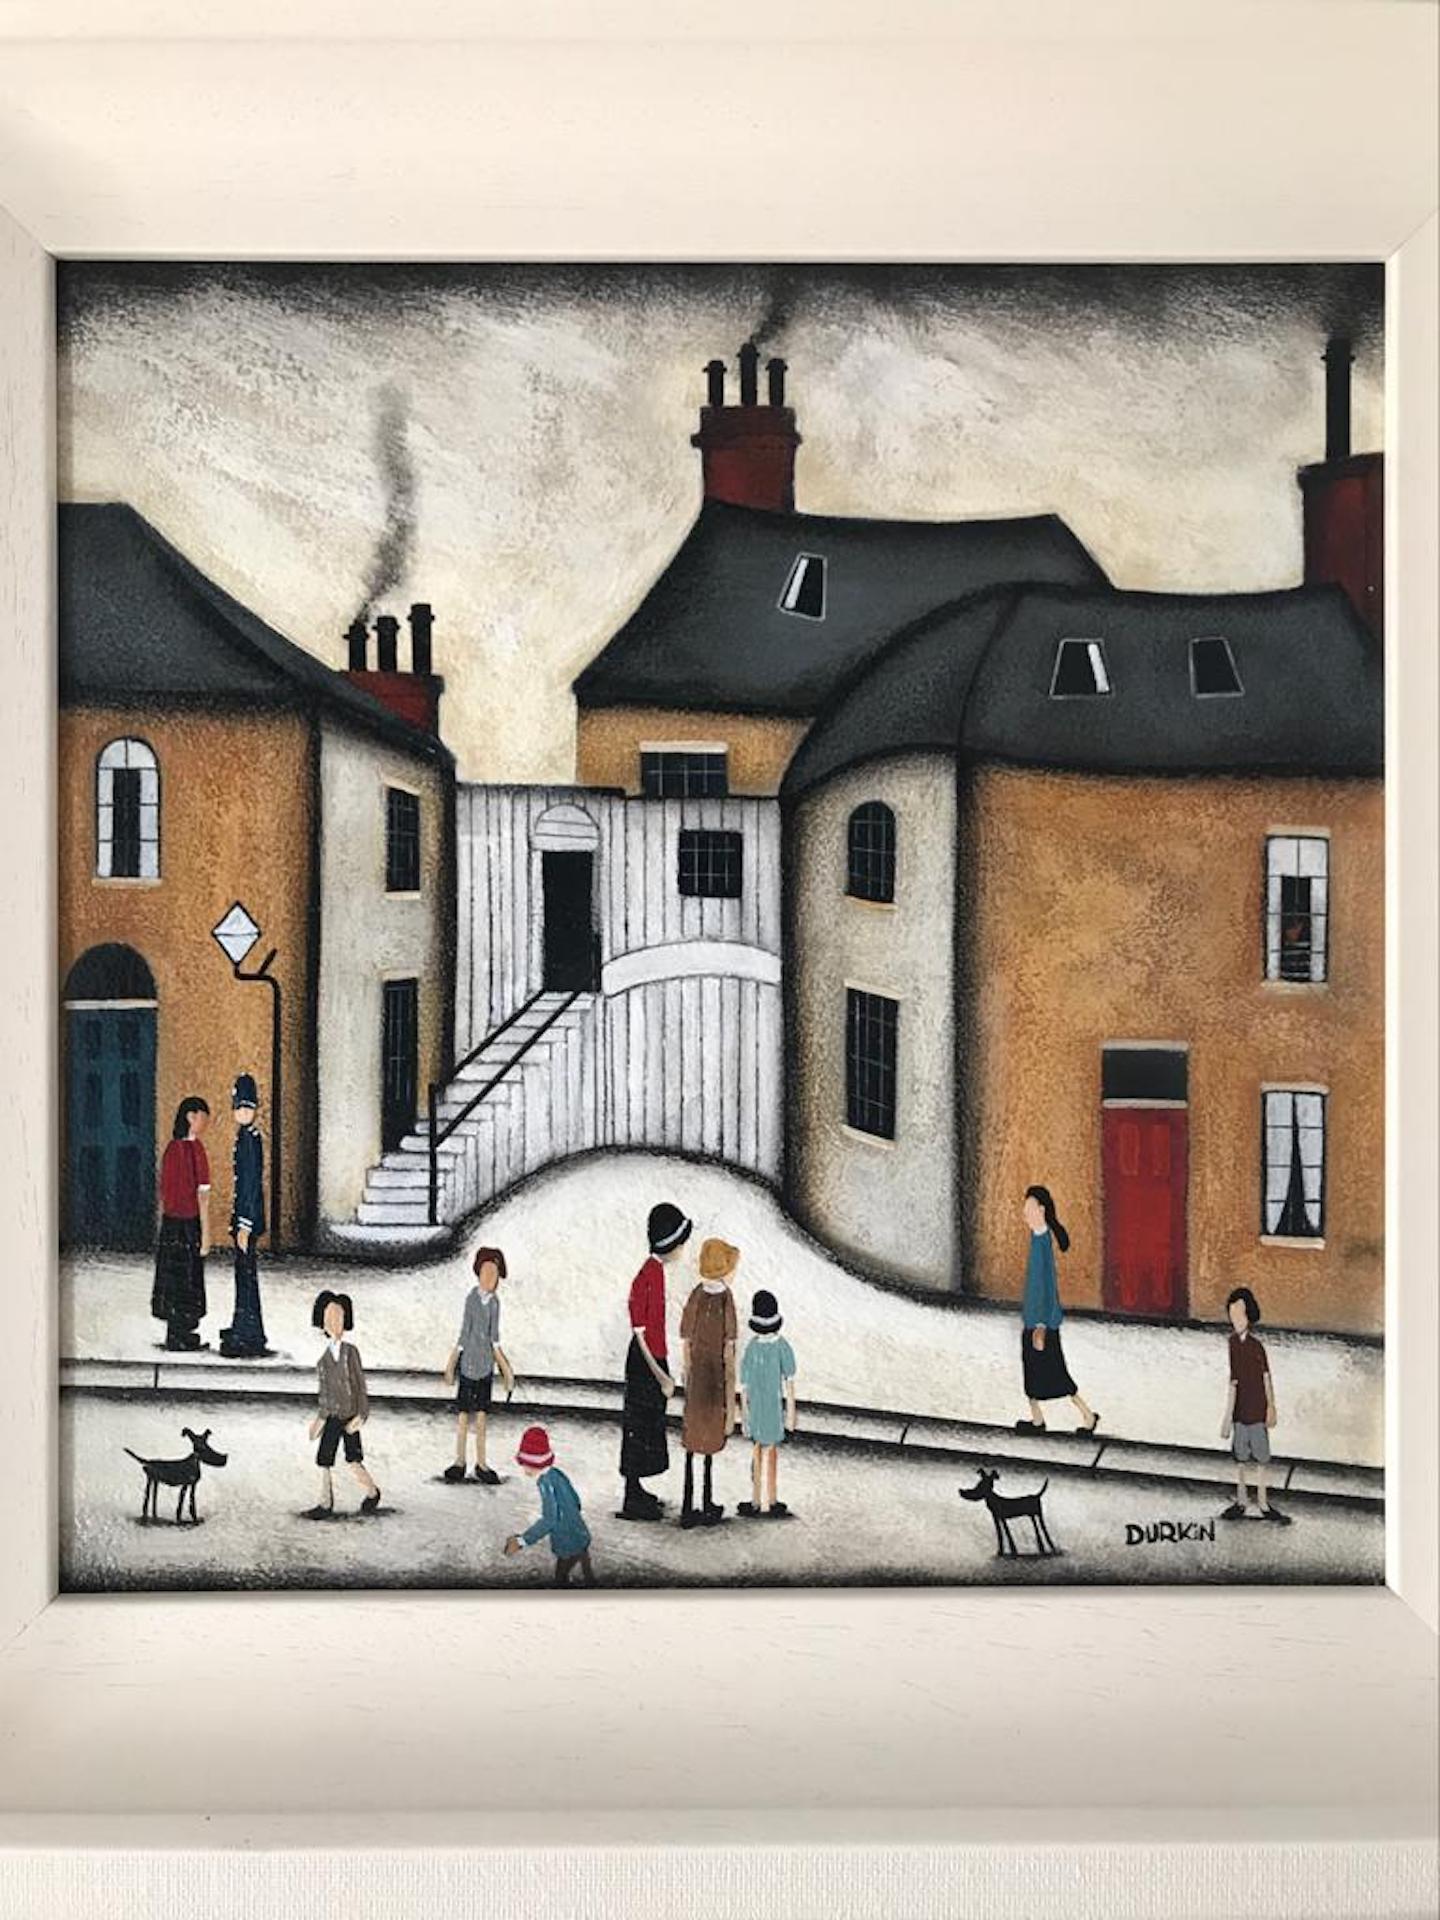 Sean Durkin, Village Life, Contemporary Painting in the Style of Lowry 1